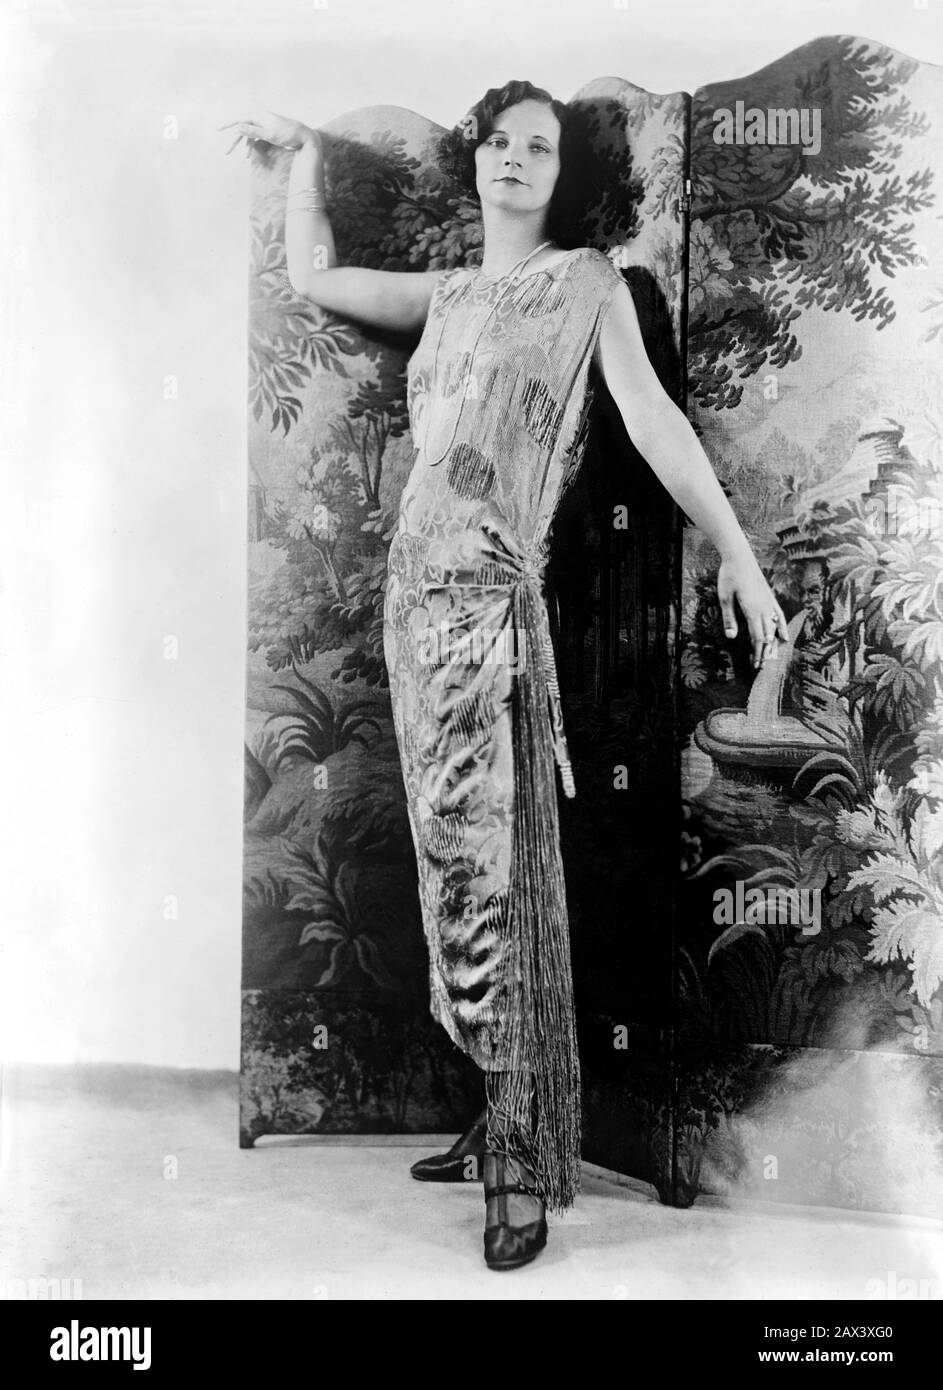 Overgivelse Bedrag kranium 1922 ca , New York , USA : The actress BILLIE WESTON ( Billy weston ) .  Billy Weston, an actress, formerly with the FASHION SHOW of Baltimore and  said to be